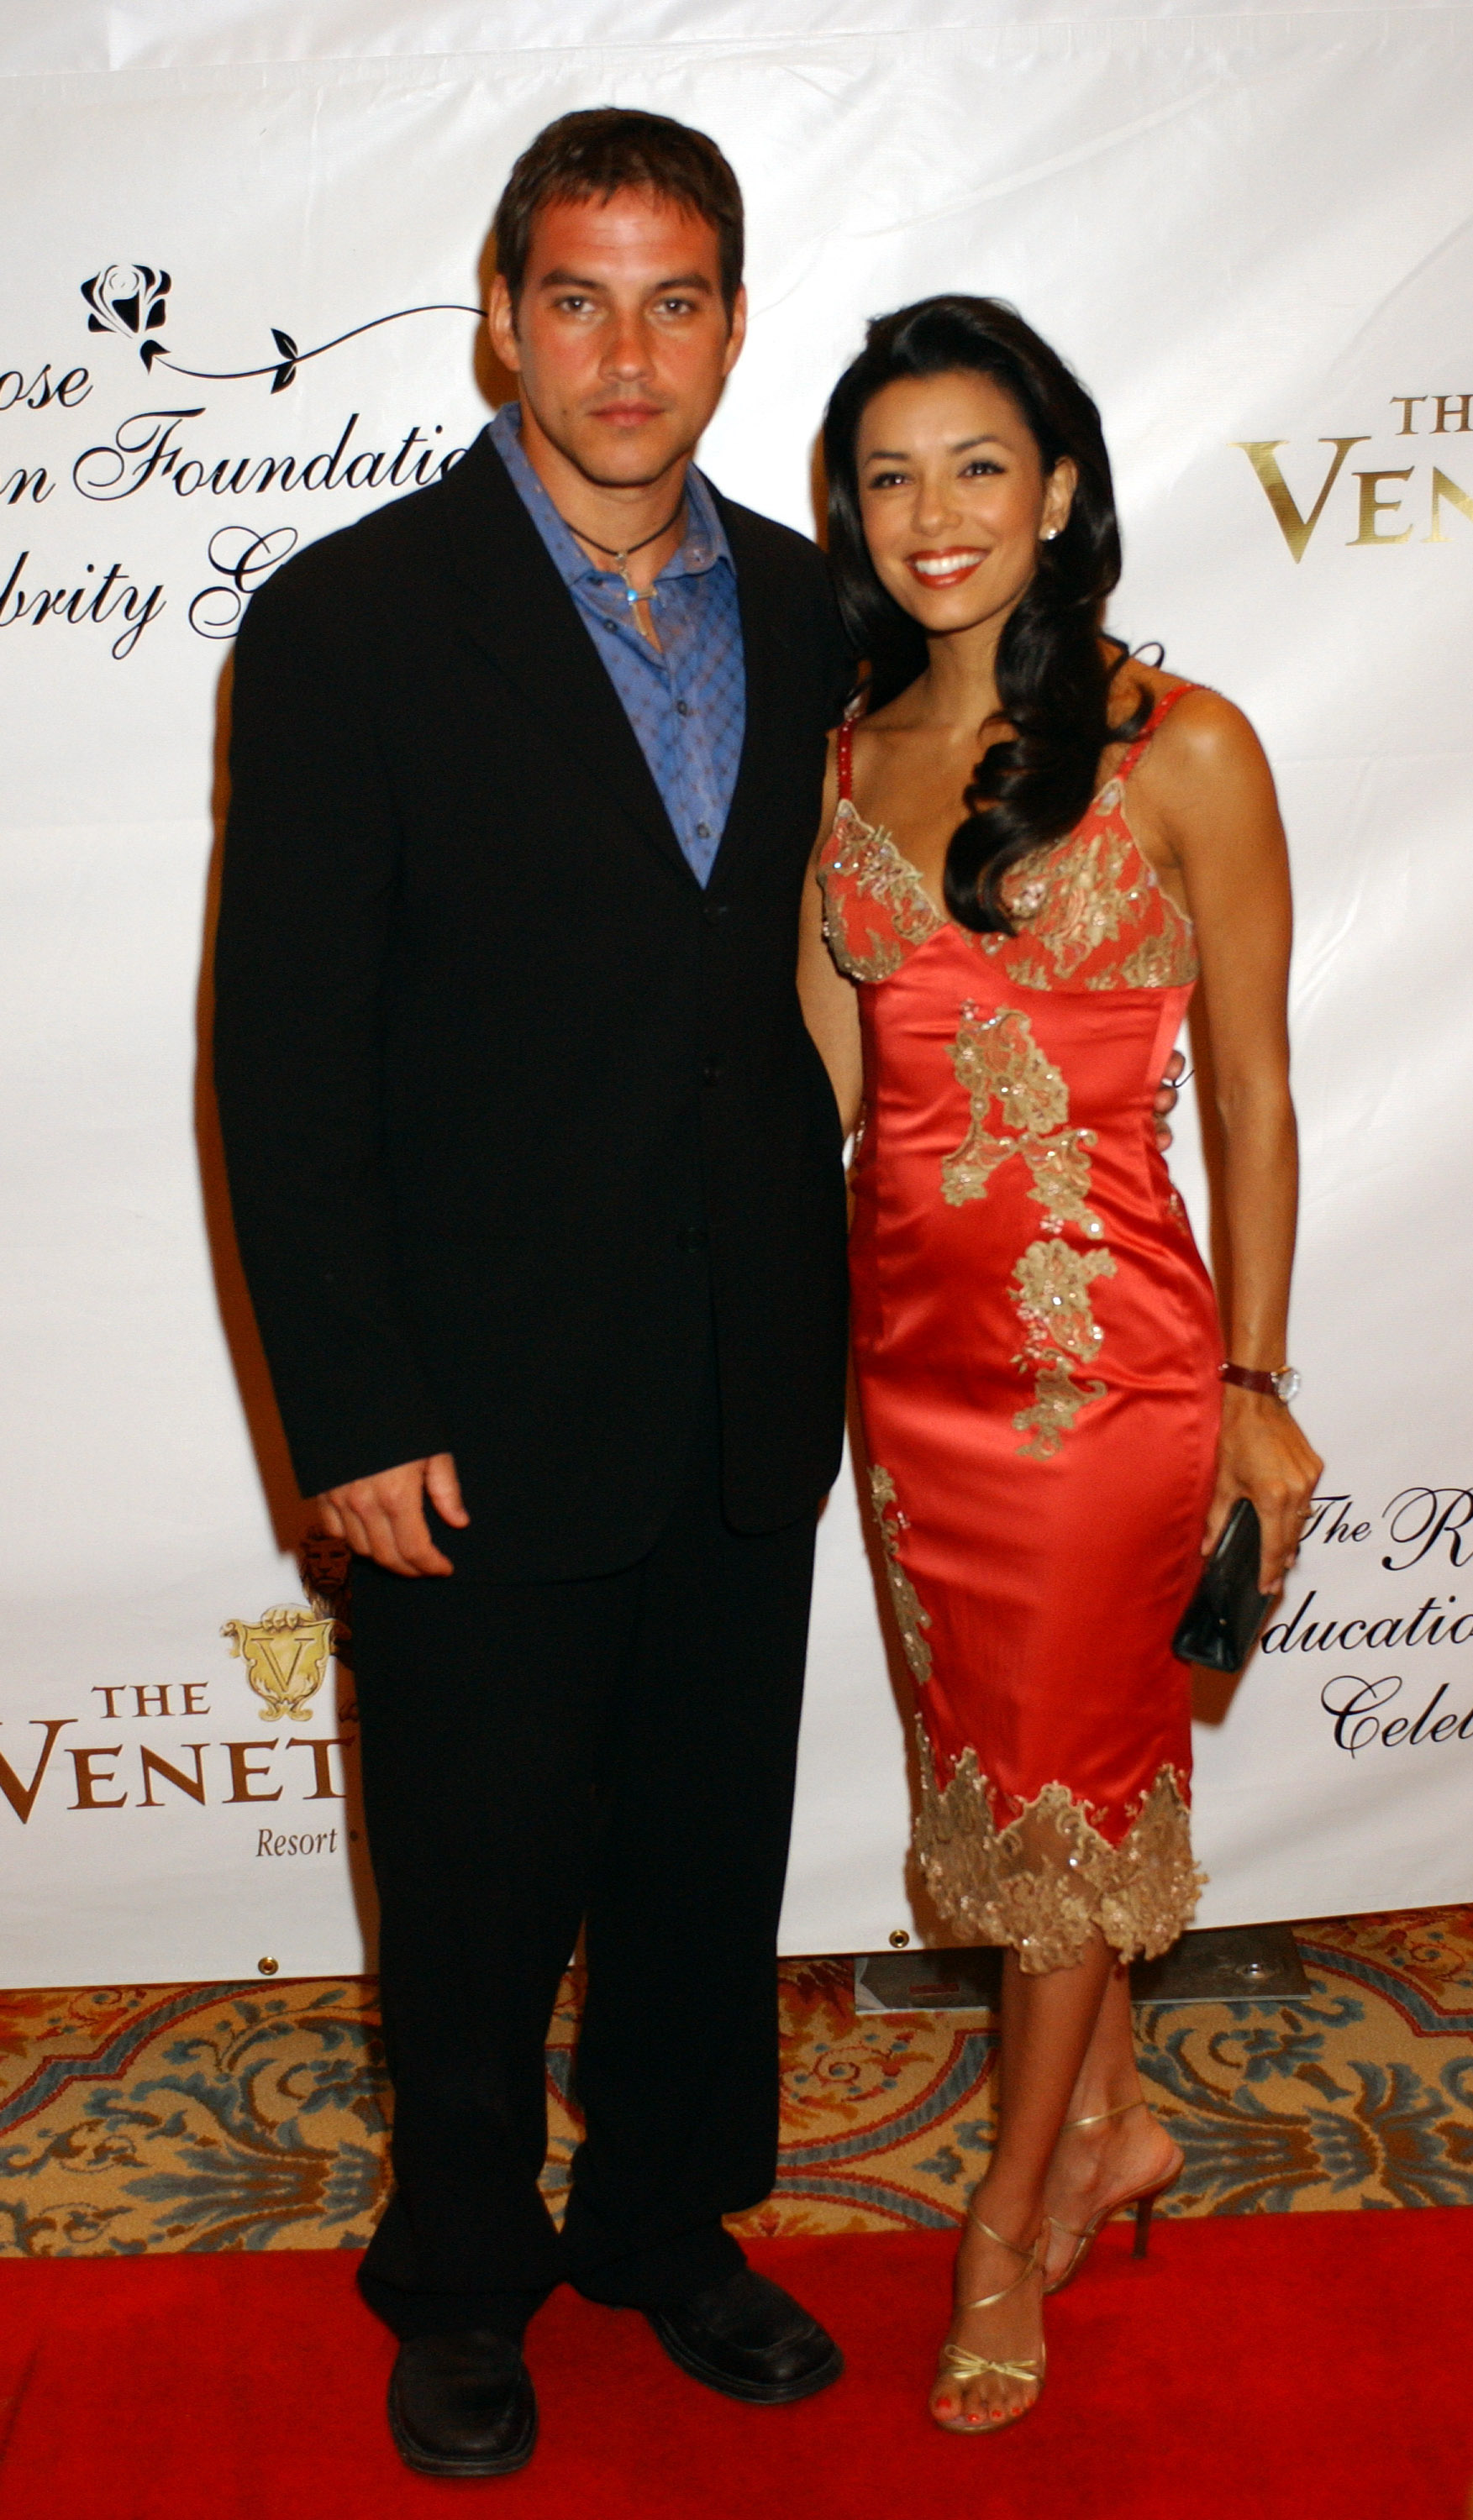 Tyler Christopher and Eva Longoria at The Rose Education Foundation's second annual gala on June 28, 2003 | Source: Getty Images